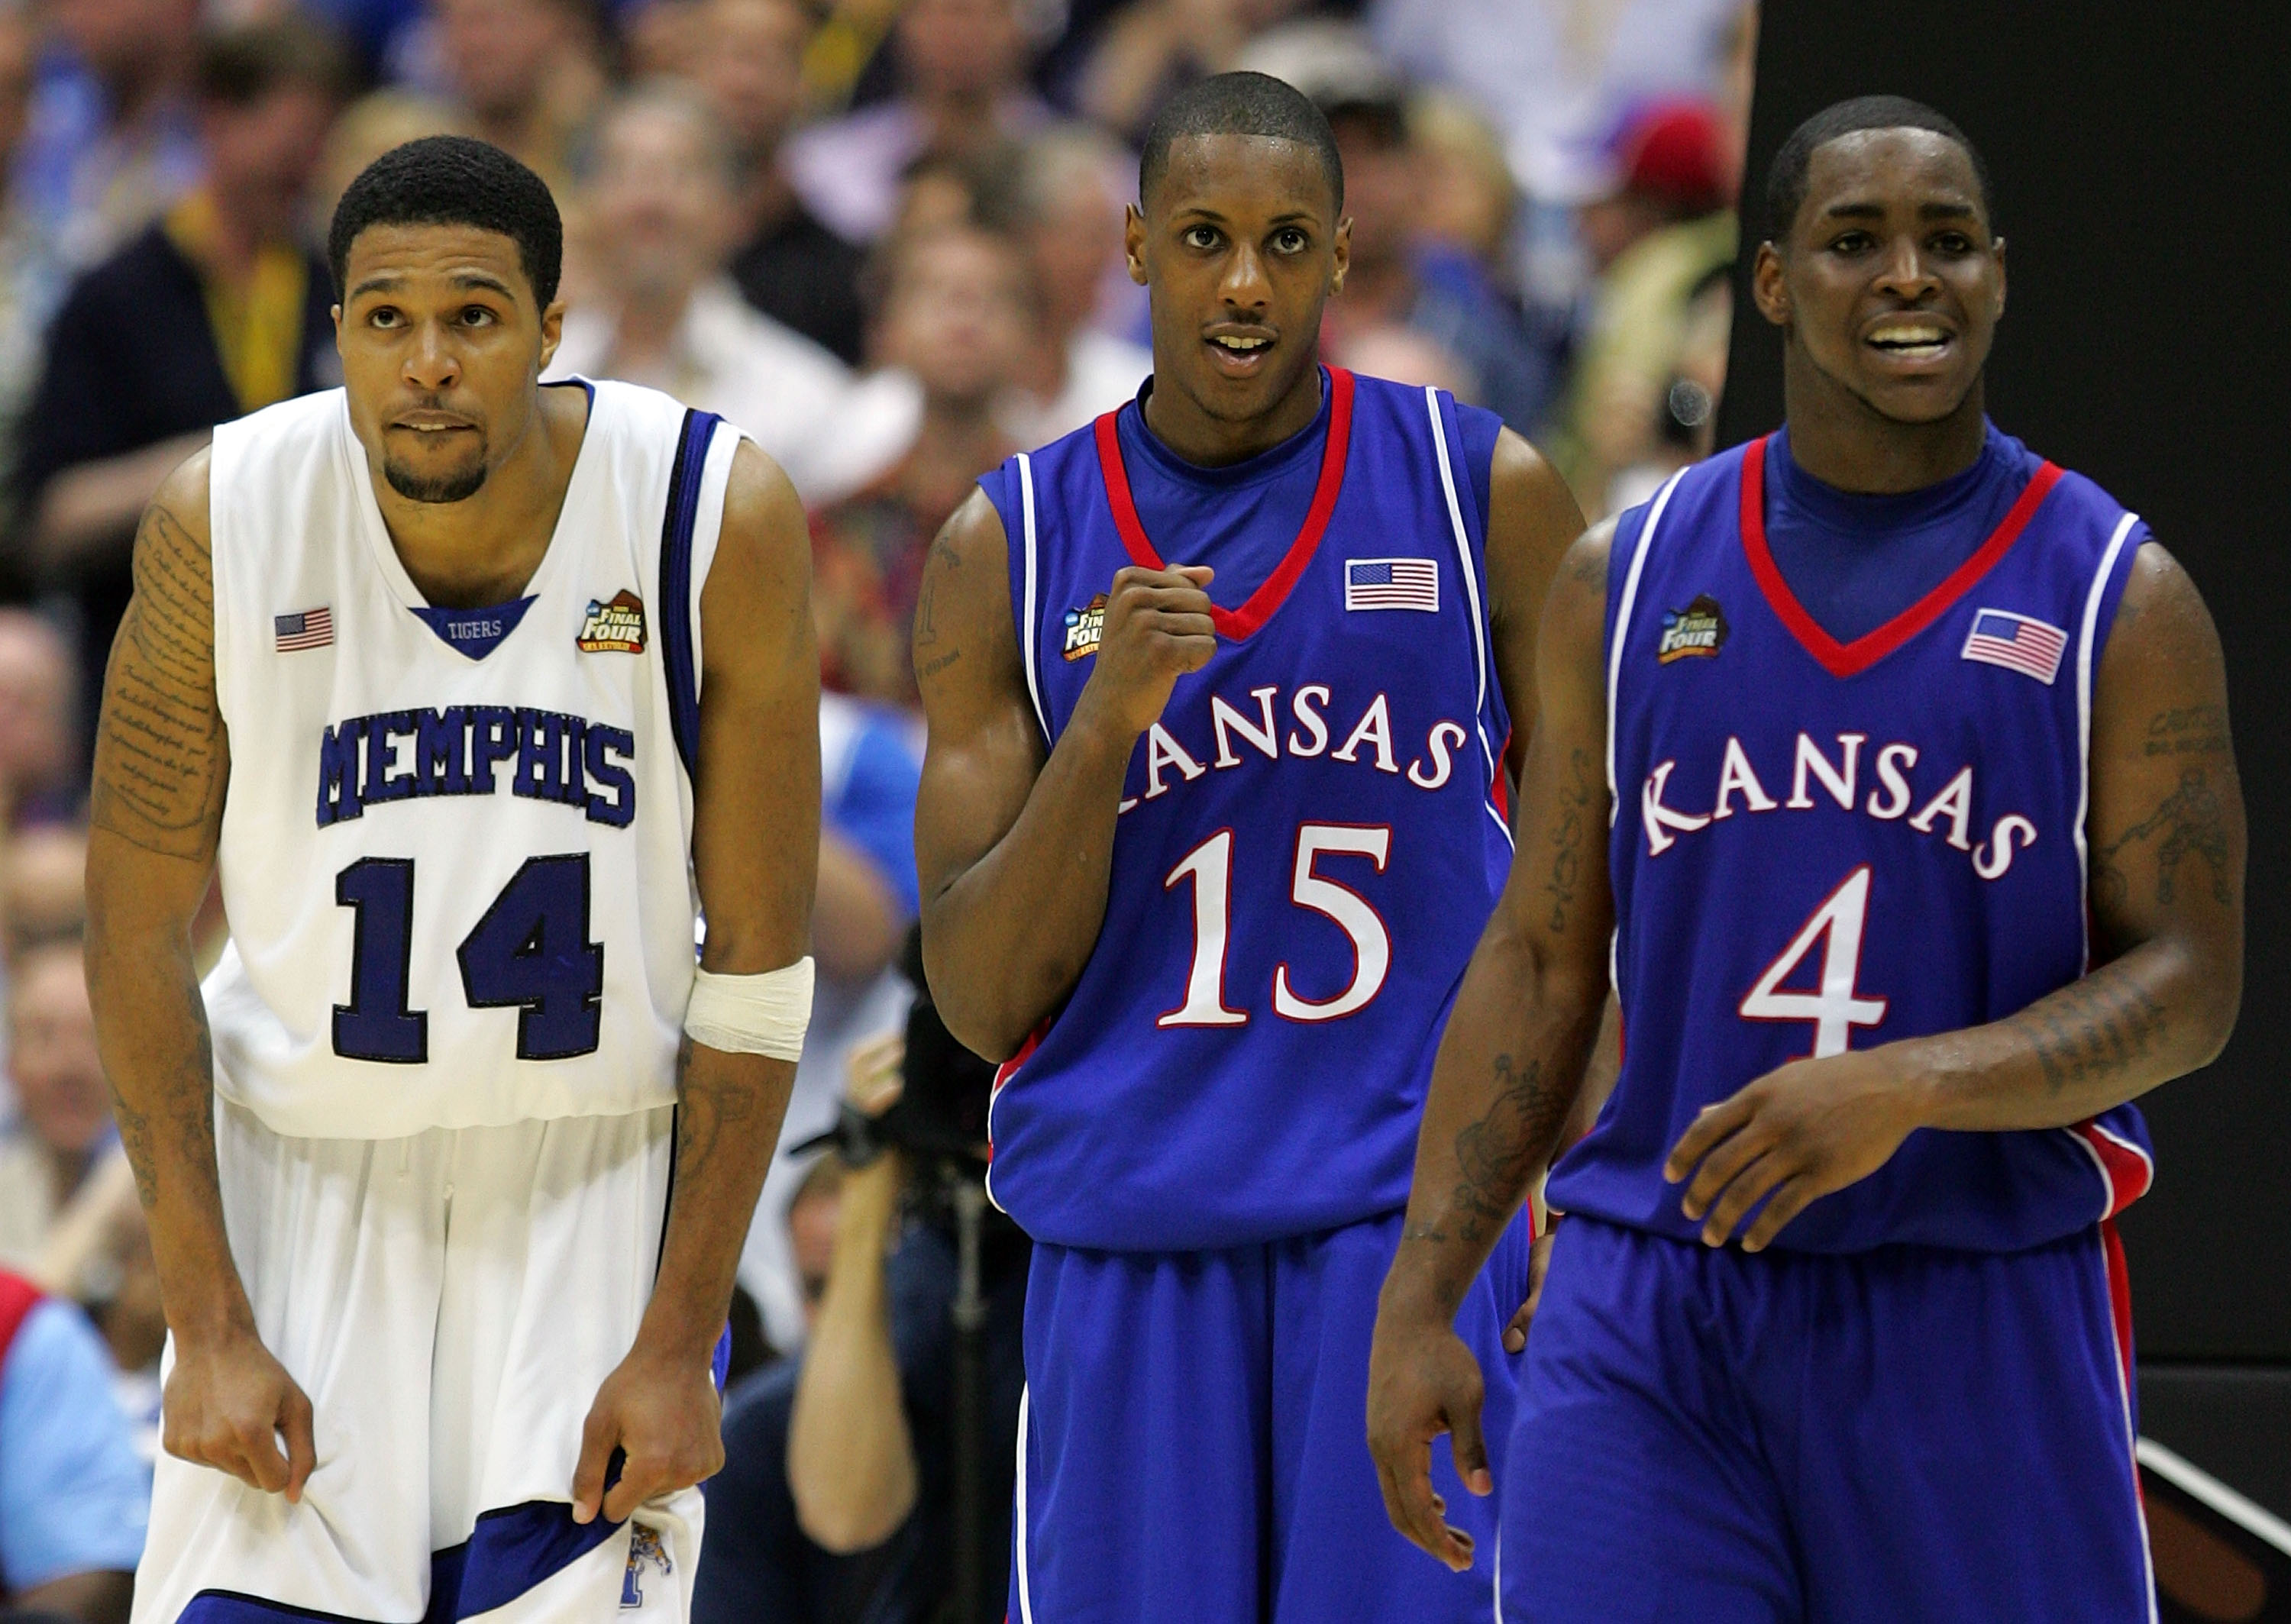 SAN ANTONIO - APRIL 07:  Mario Chalmers #15 of the Kansas Jayhawks reacts in overtime along with teammate Sherron Collins #4 as Chris Douglas-Roberts #14 of the Memphis Tigers looks on during the 2008 NCAA Men's National Championship game at the Alamodome